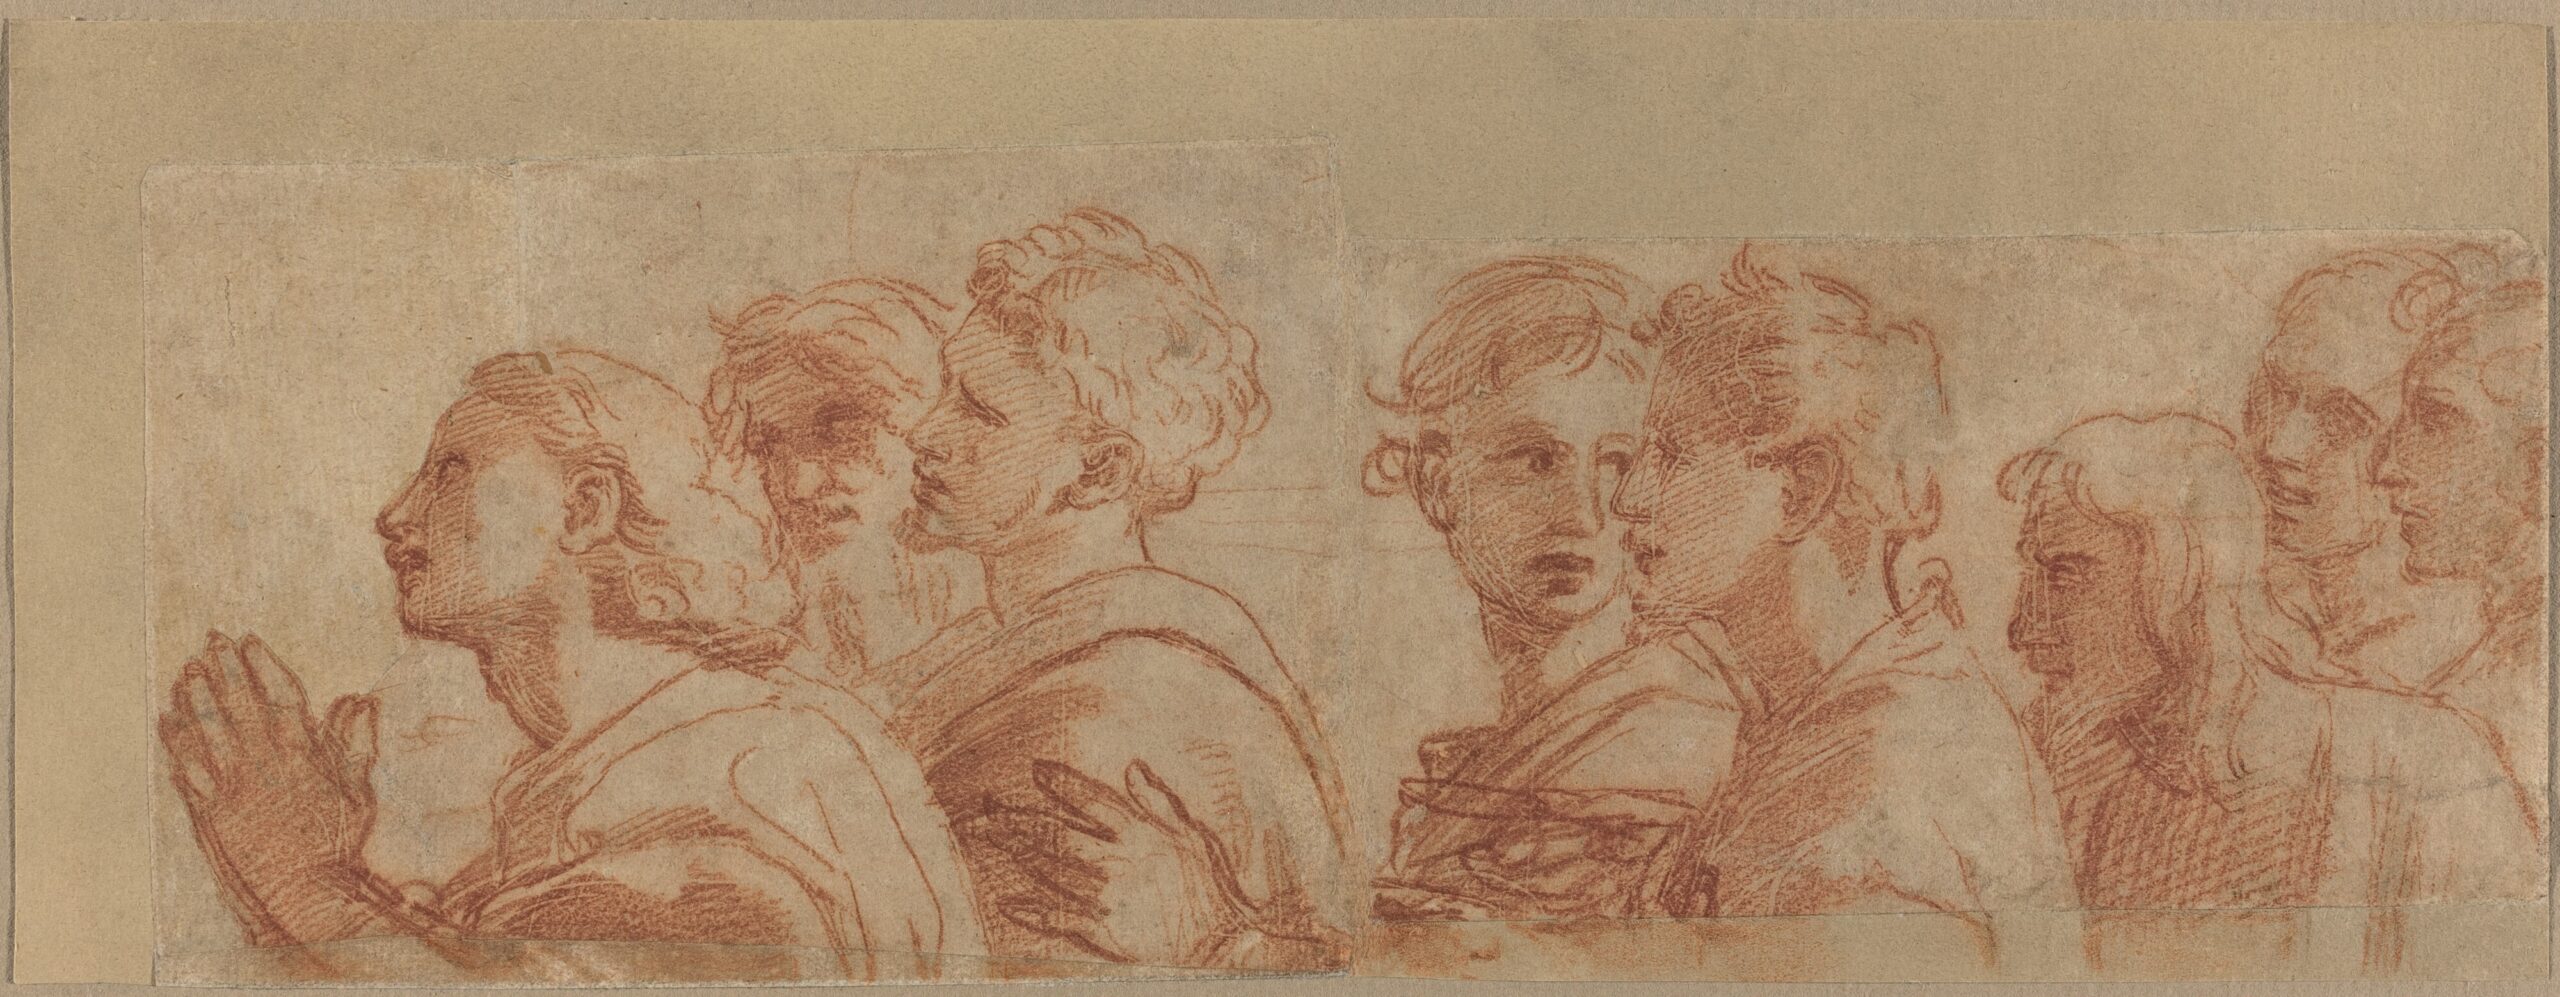 Raphael, Eight Apostles, c. 1514. Red chalk over stylus underdrawing and traces of leadpoint on laid paper, cut in two pieces and rejoined; laid down. National Gallery of Art, Washington, Woodner Collection, 1993